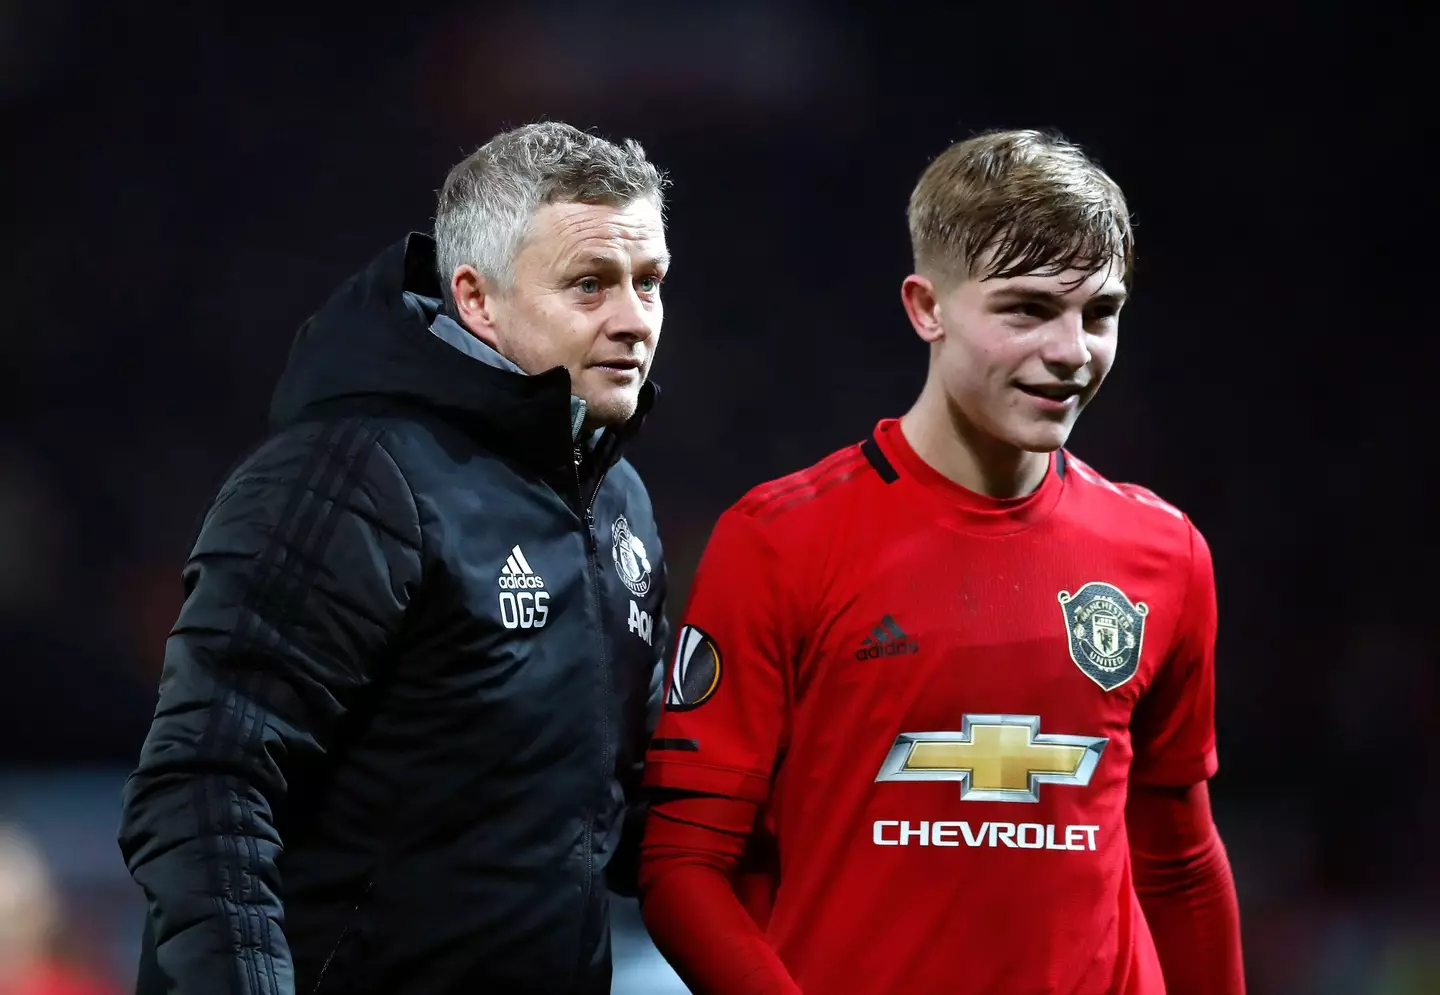 Williams made his senior debut for United under Ole Gunnar Solskjaer in 2019 (Image: PA)